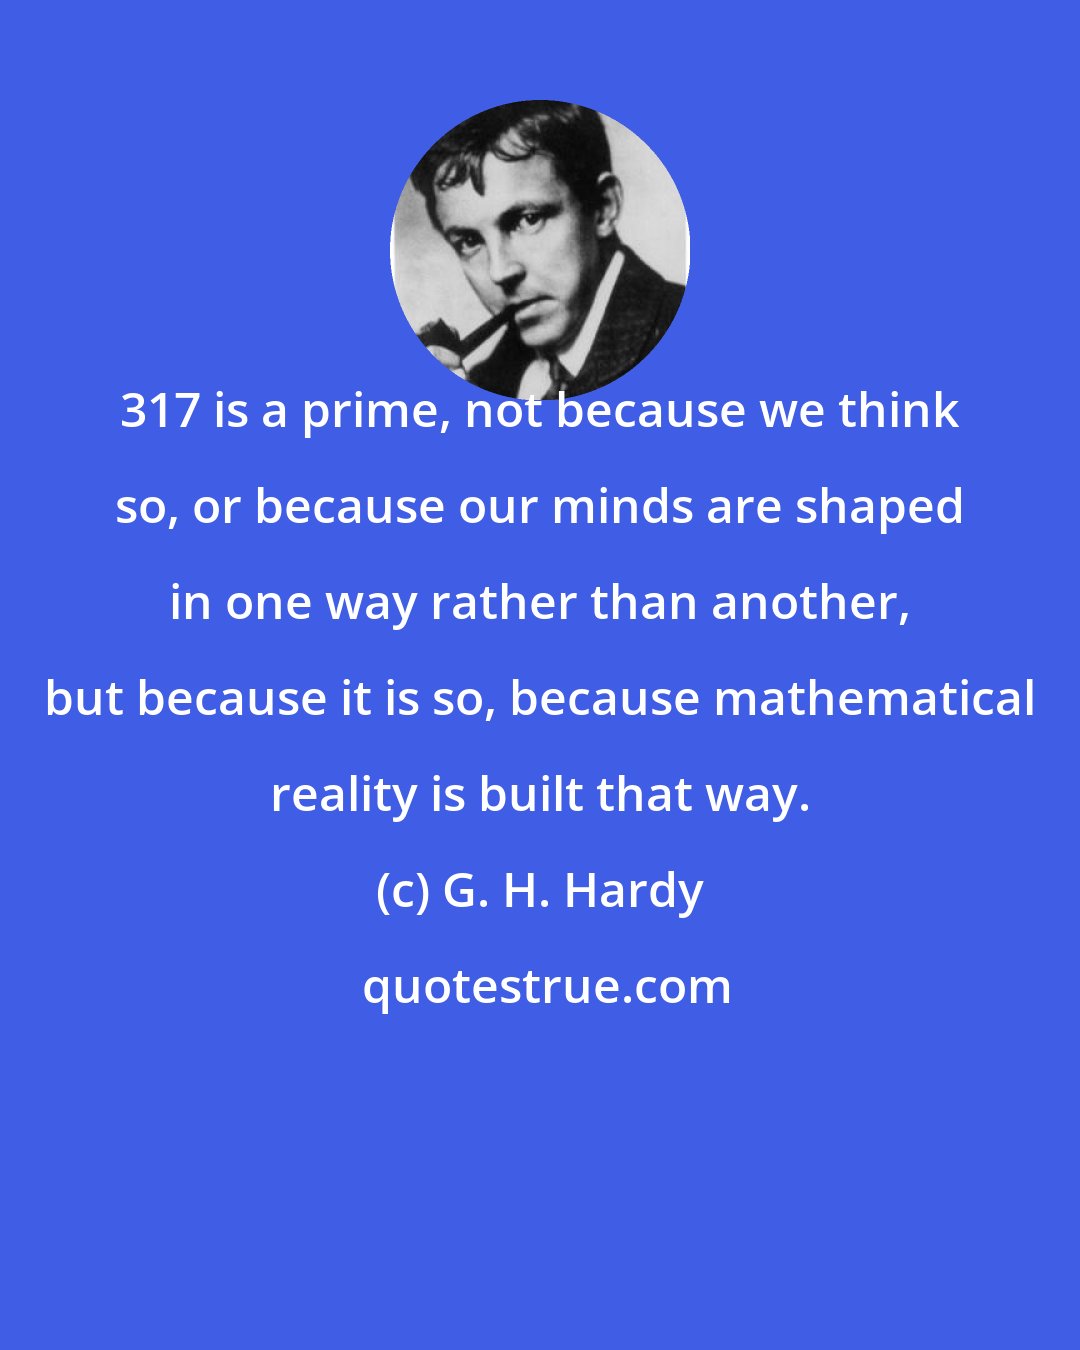 G. H. Hardy: 317 is a prime, not because we think so, or because our minds are shaped in one way rather than another, but because it is so, because mathematical reality is built that way.